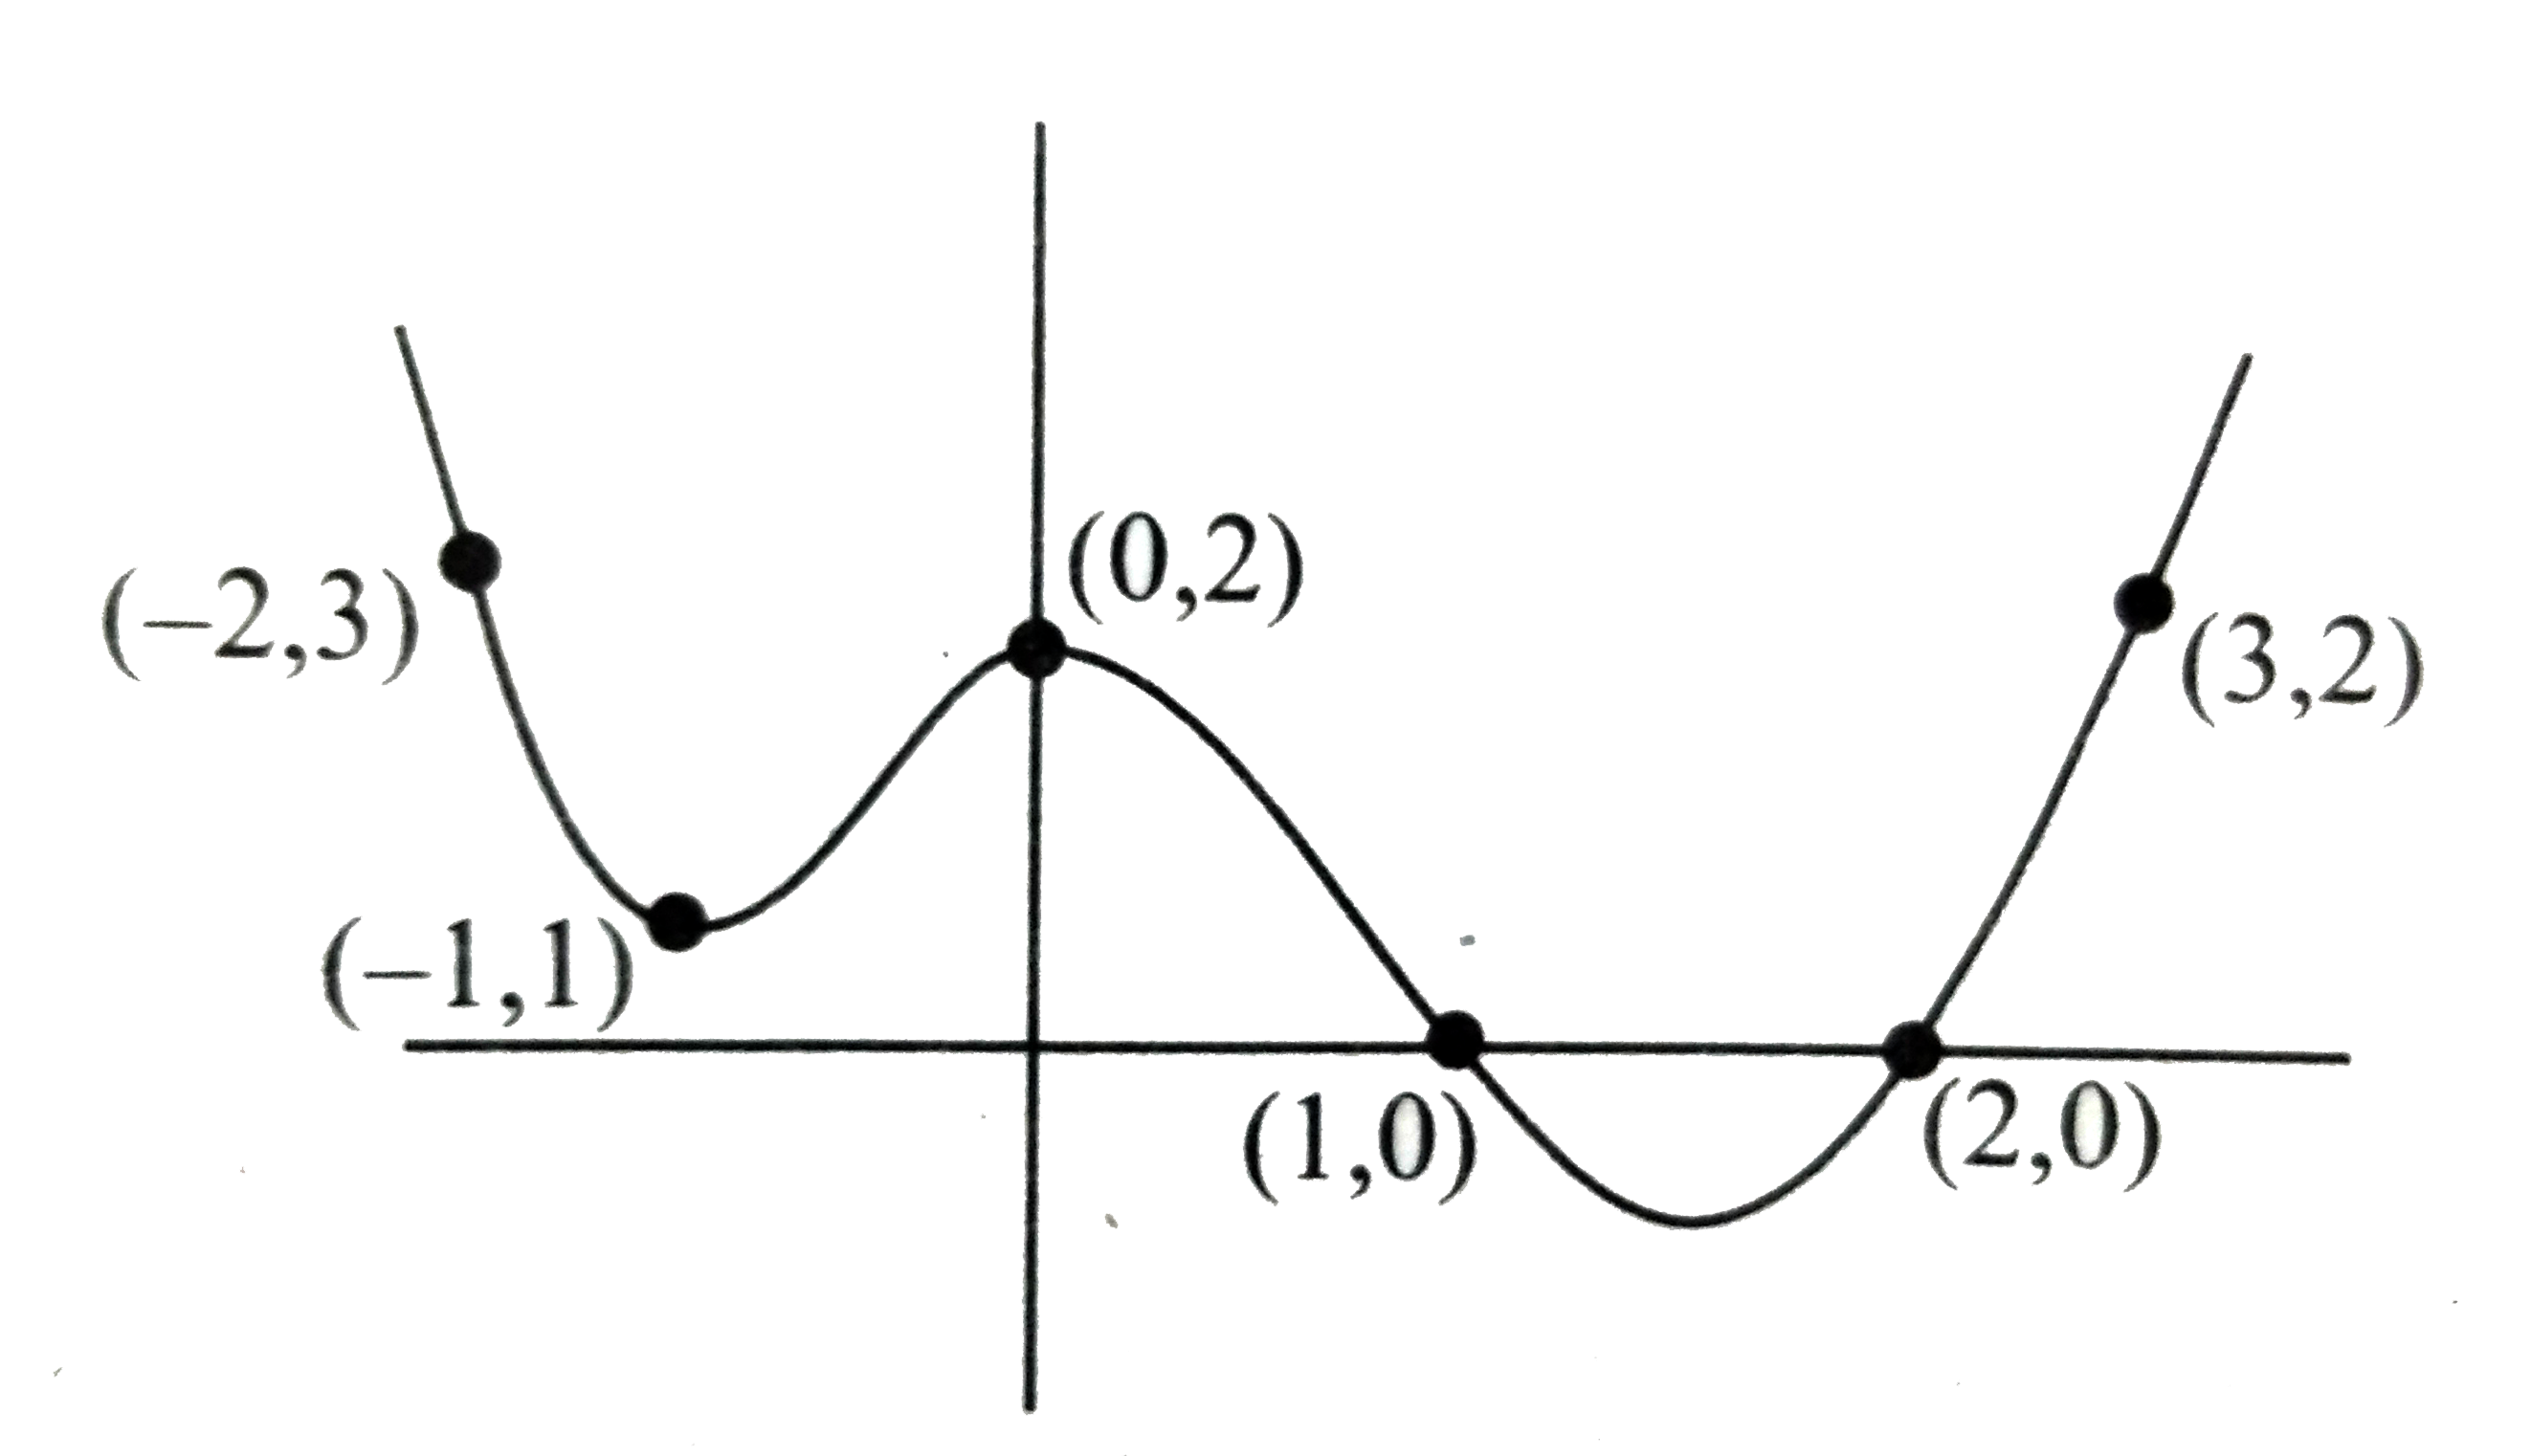 In the given figure graph of y=p(x)=x^(4)+ax^(3)+bx^(2)+cx+d is given      The product of all imaginary roots of p(x)=0 is
(a) 1
(b) 2
(c) 1/3
(d) 1/4